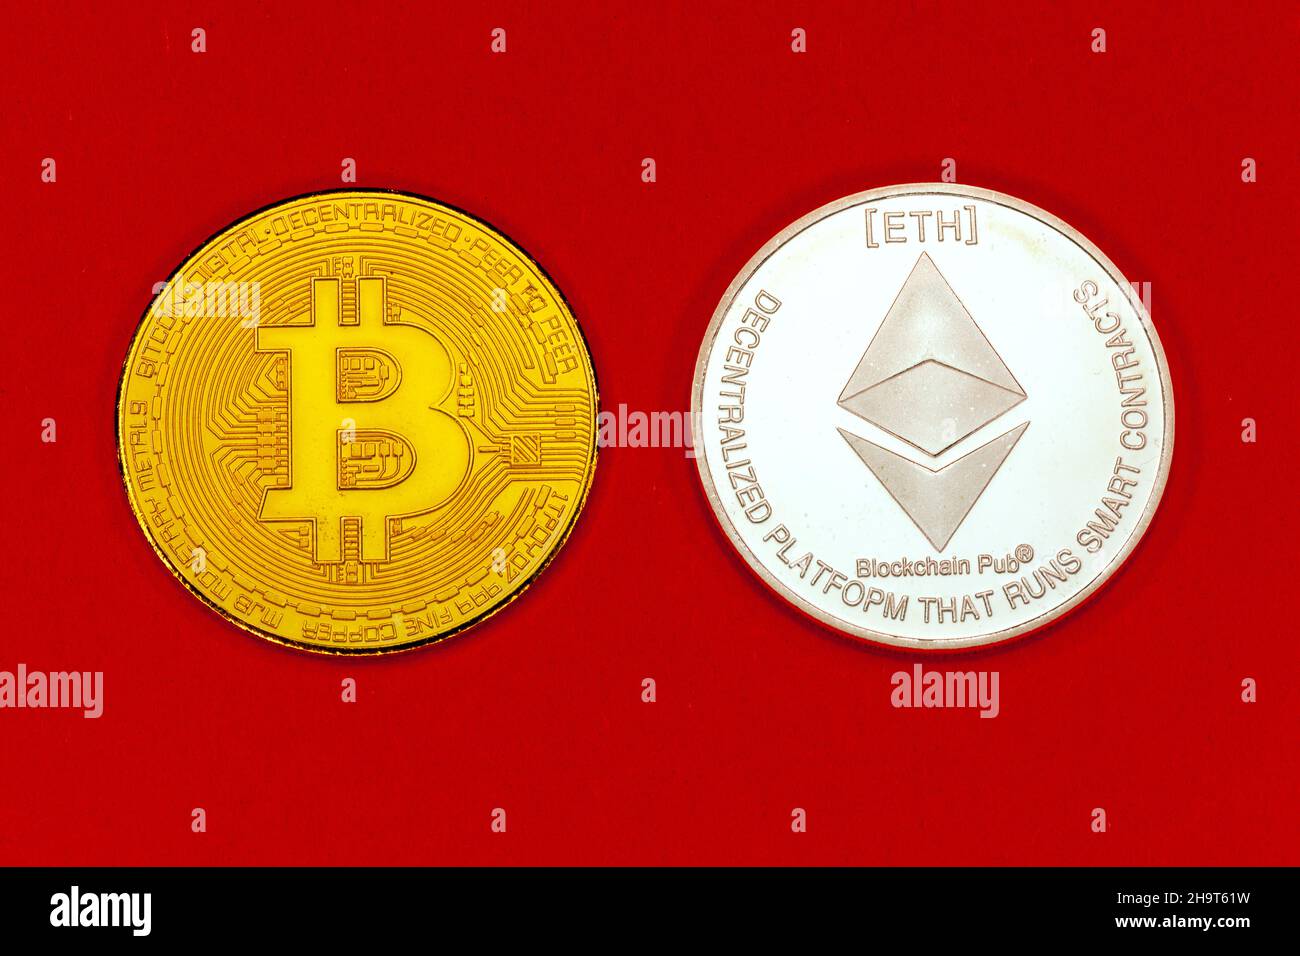 Bitcoin and Ethereum crytocurrencey coins. Stock Photo